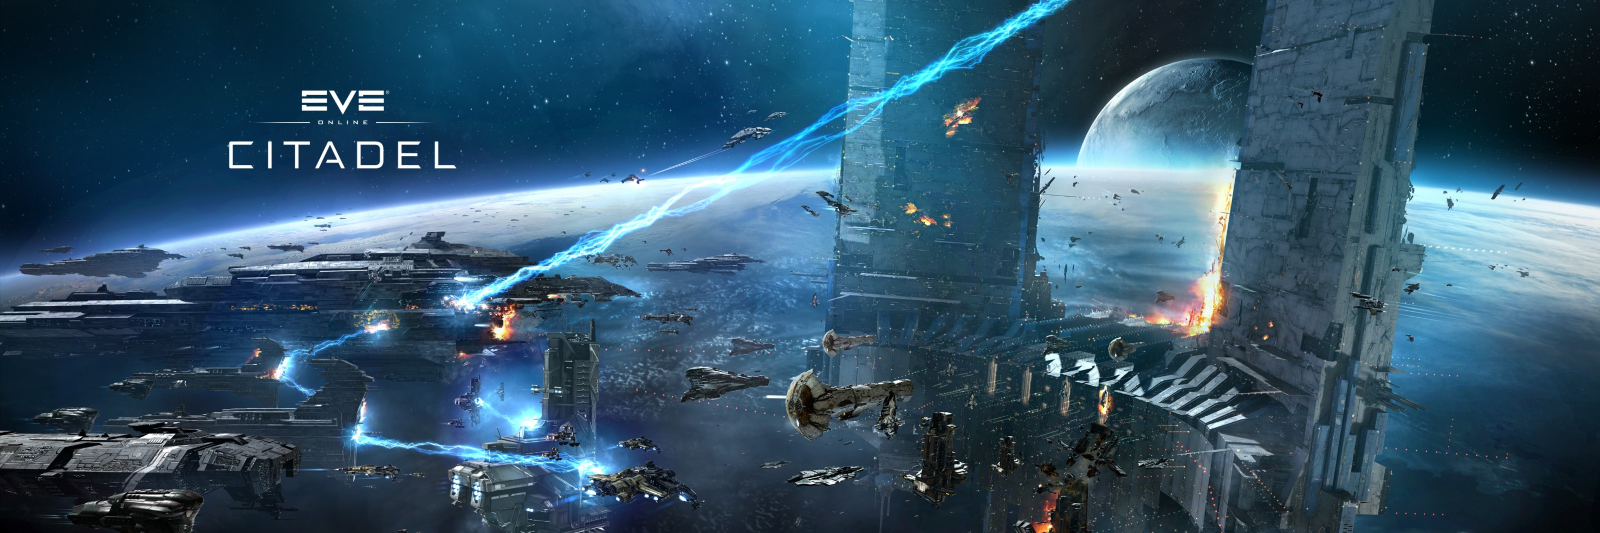 EVE Online Citadel Expansion Launches